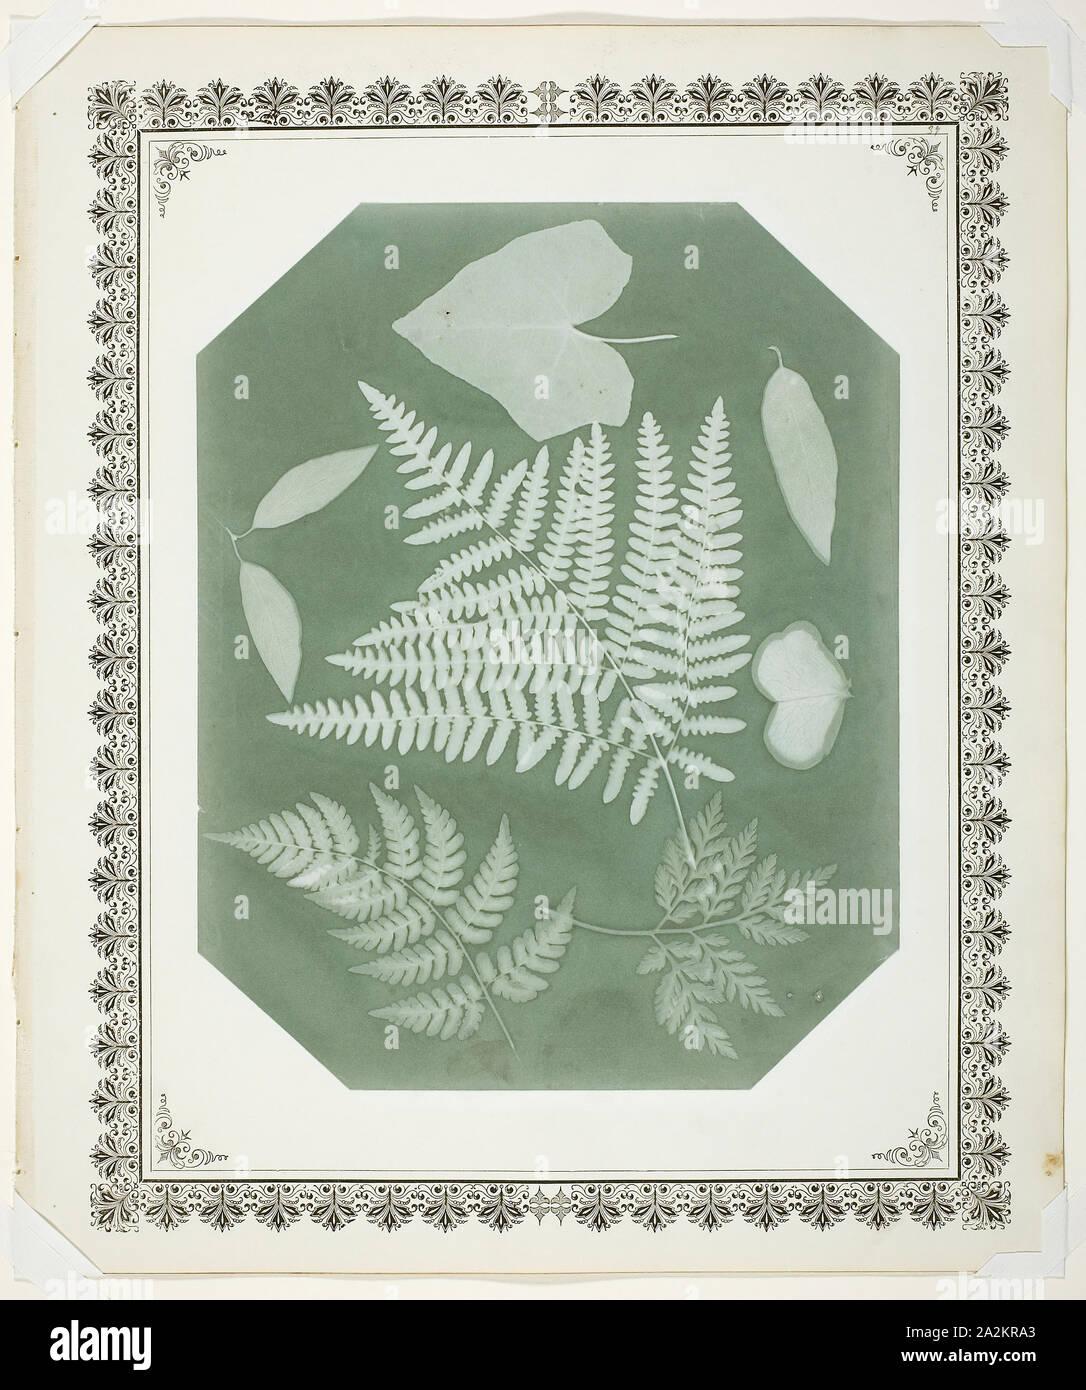 Study of Leaves, 1877, Amelia Bergner, American, 1853–1923, United States, Gum bichromate photogram, 28.9 x 22.9 cm (image), 40.7 x 34.3 cm (album page), A Country Scene, July 1848, John La Farge, American, 1835-1910, United States, Graphite with smudging, heightened with lead white gouache, on blue wove paper, 270 x 380 mm Stock Photo